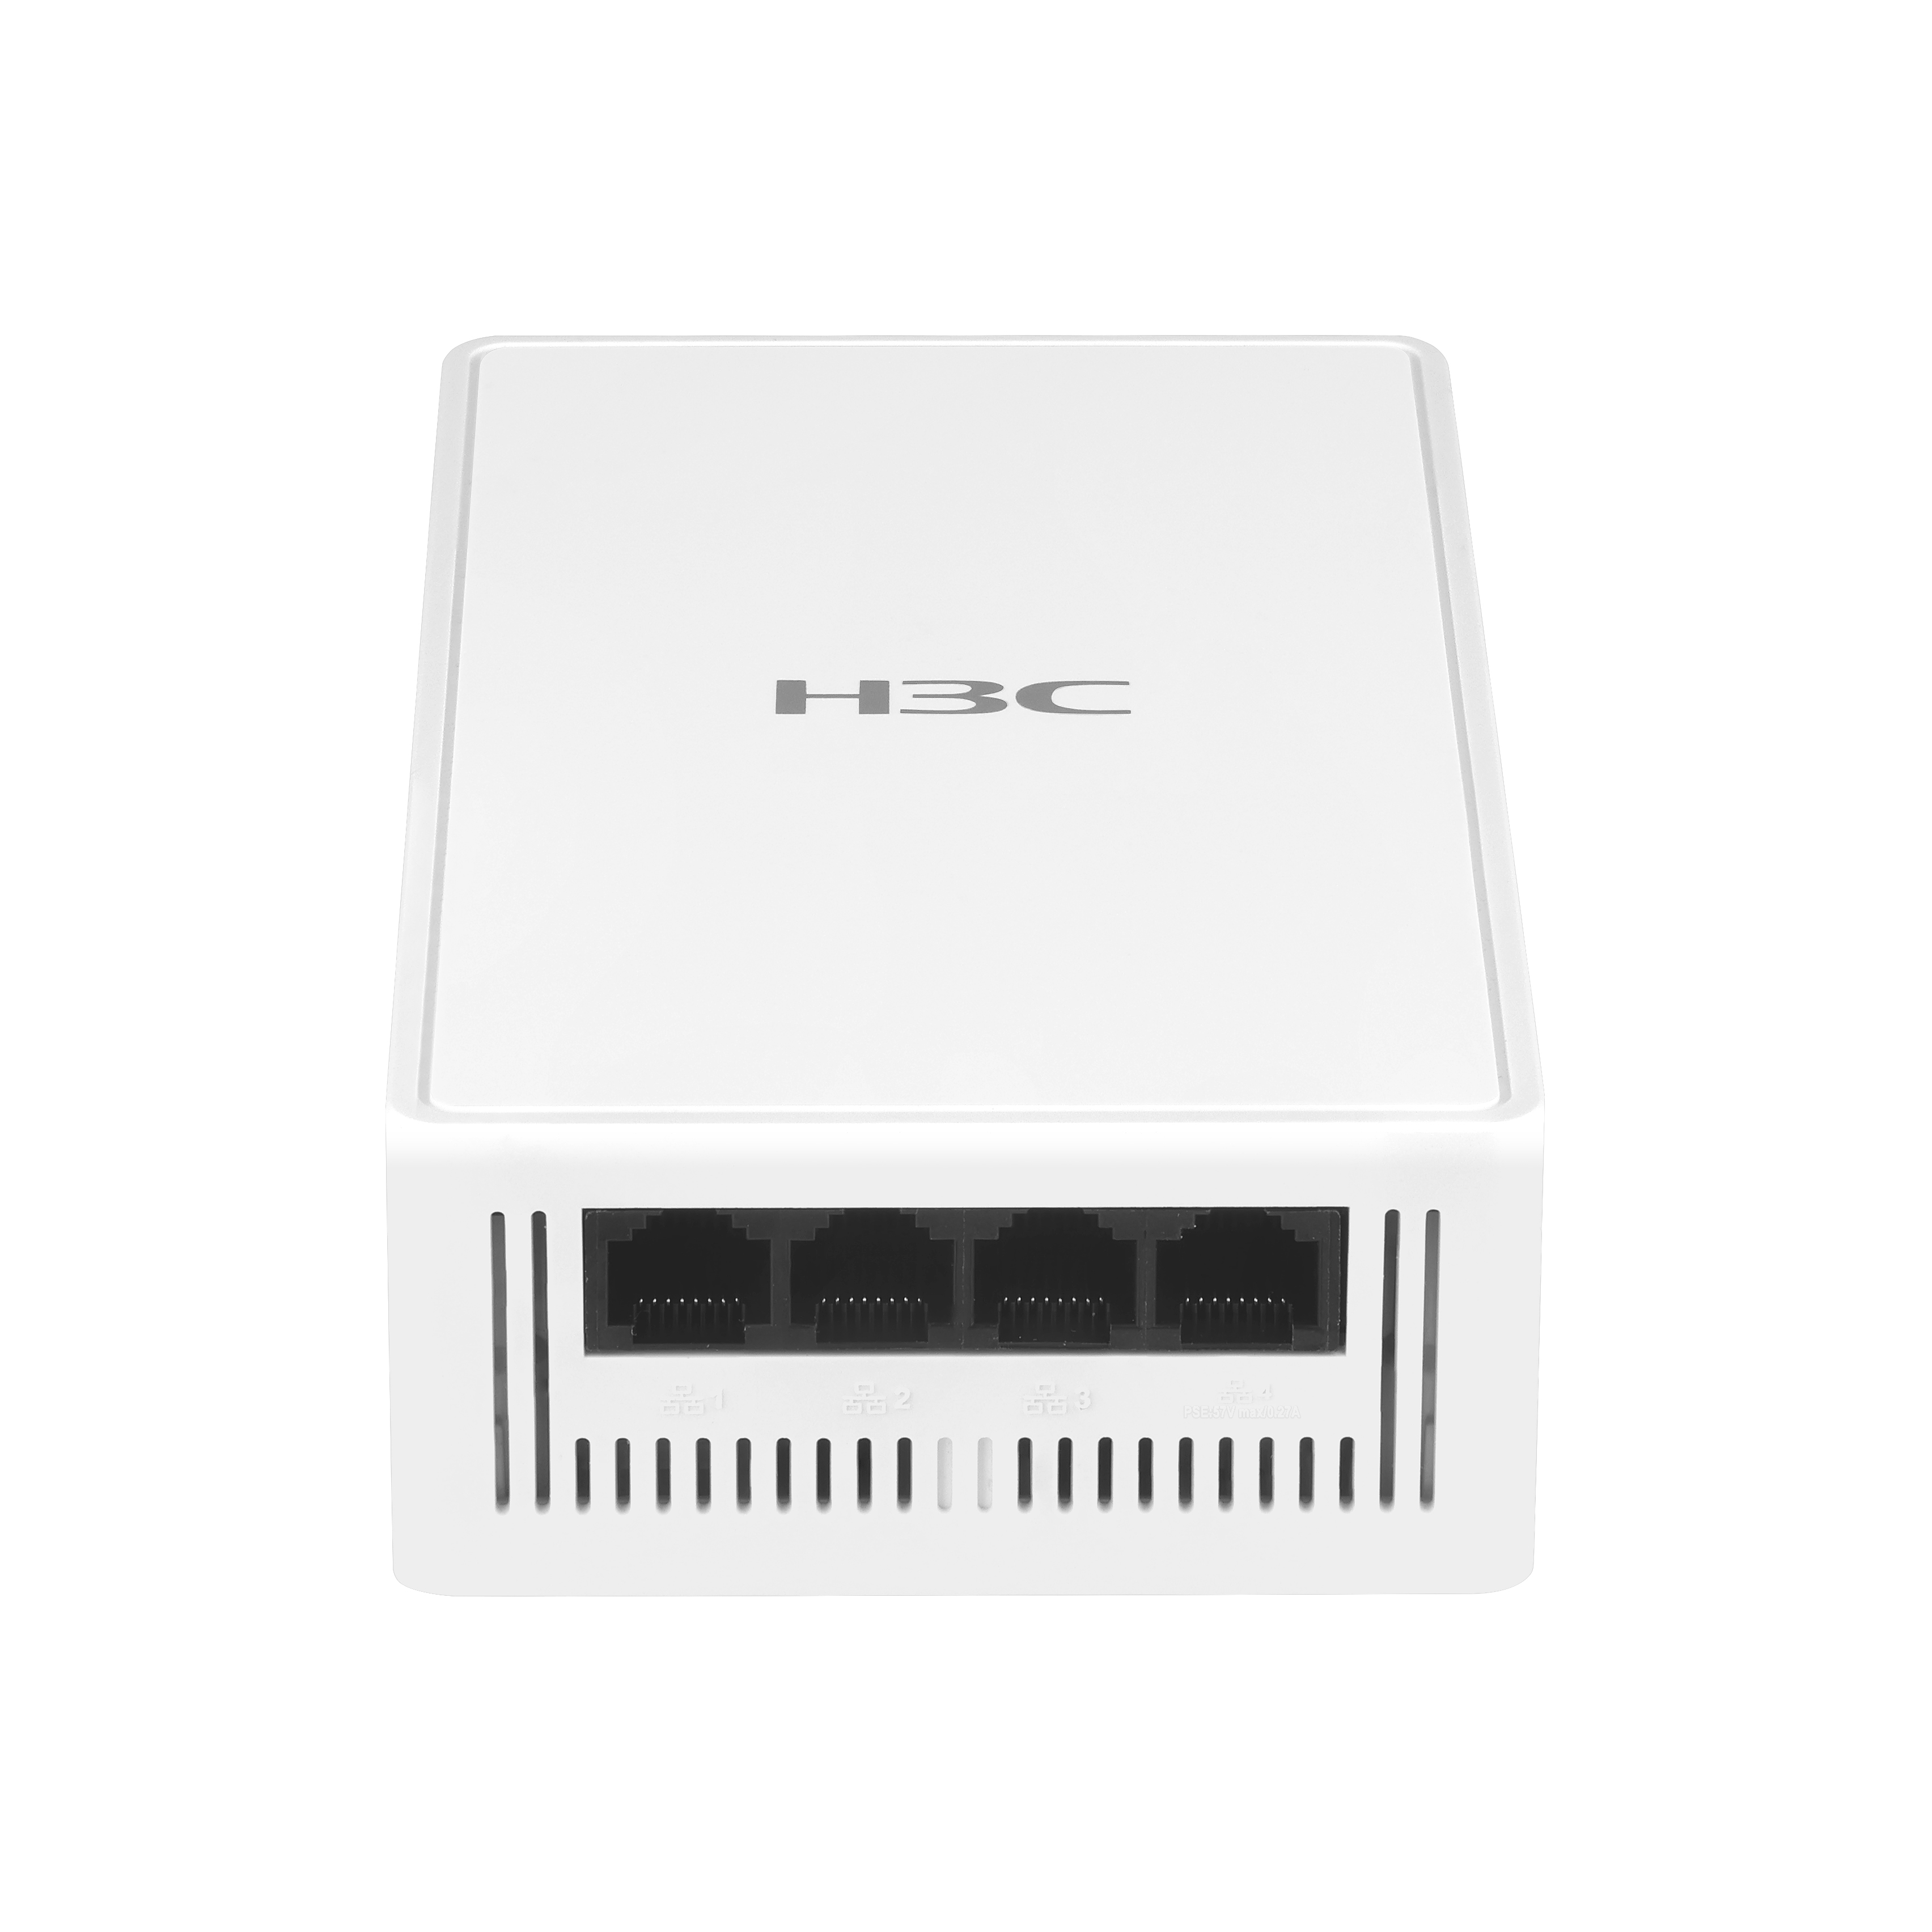 H3C WA6120H DUALBAND WIFI6 INDOOR ACCESS POINT